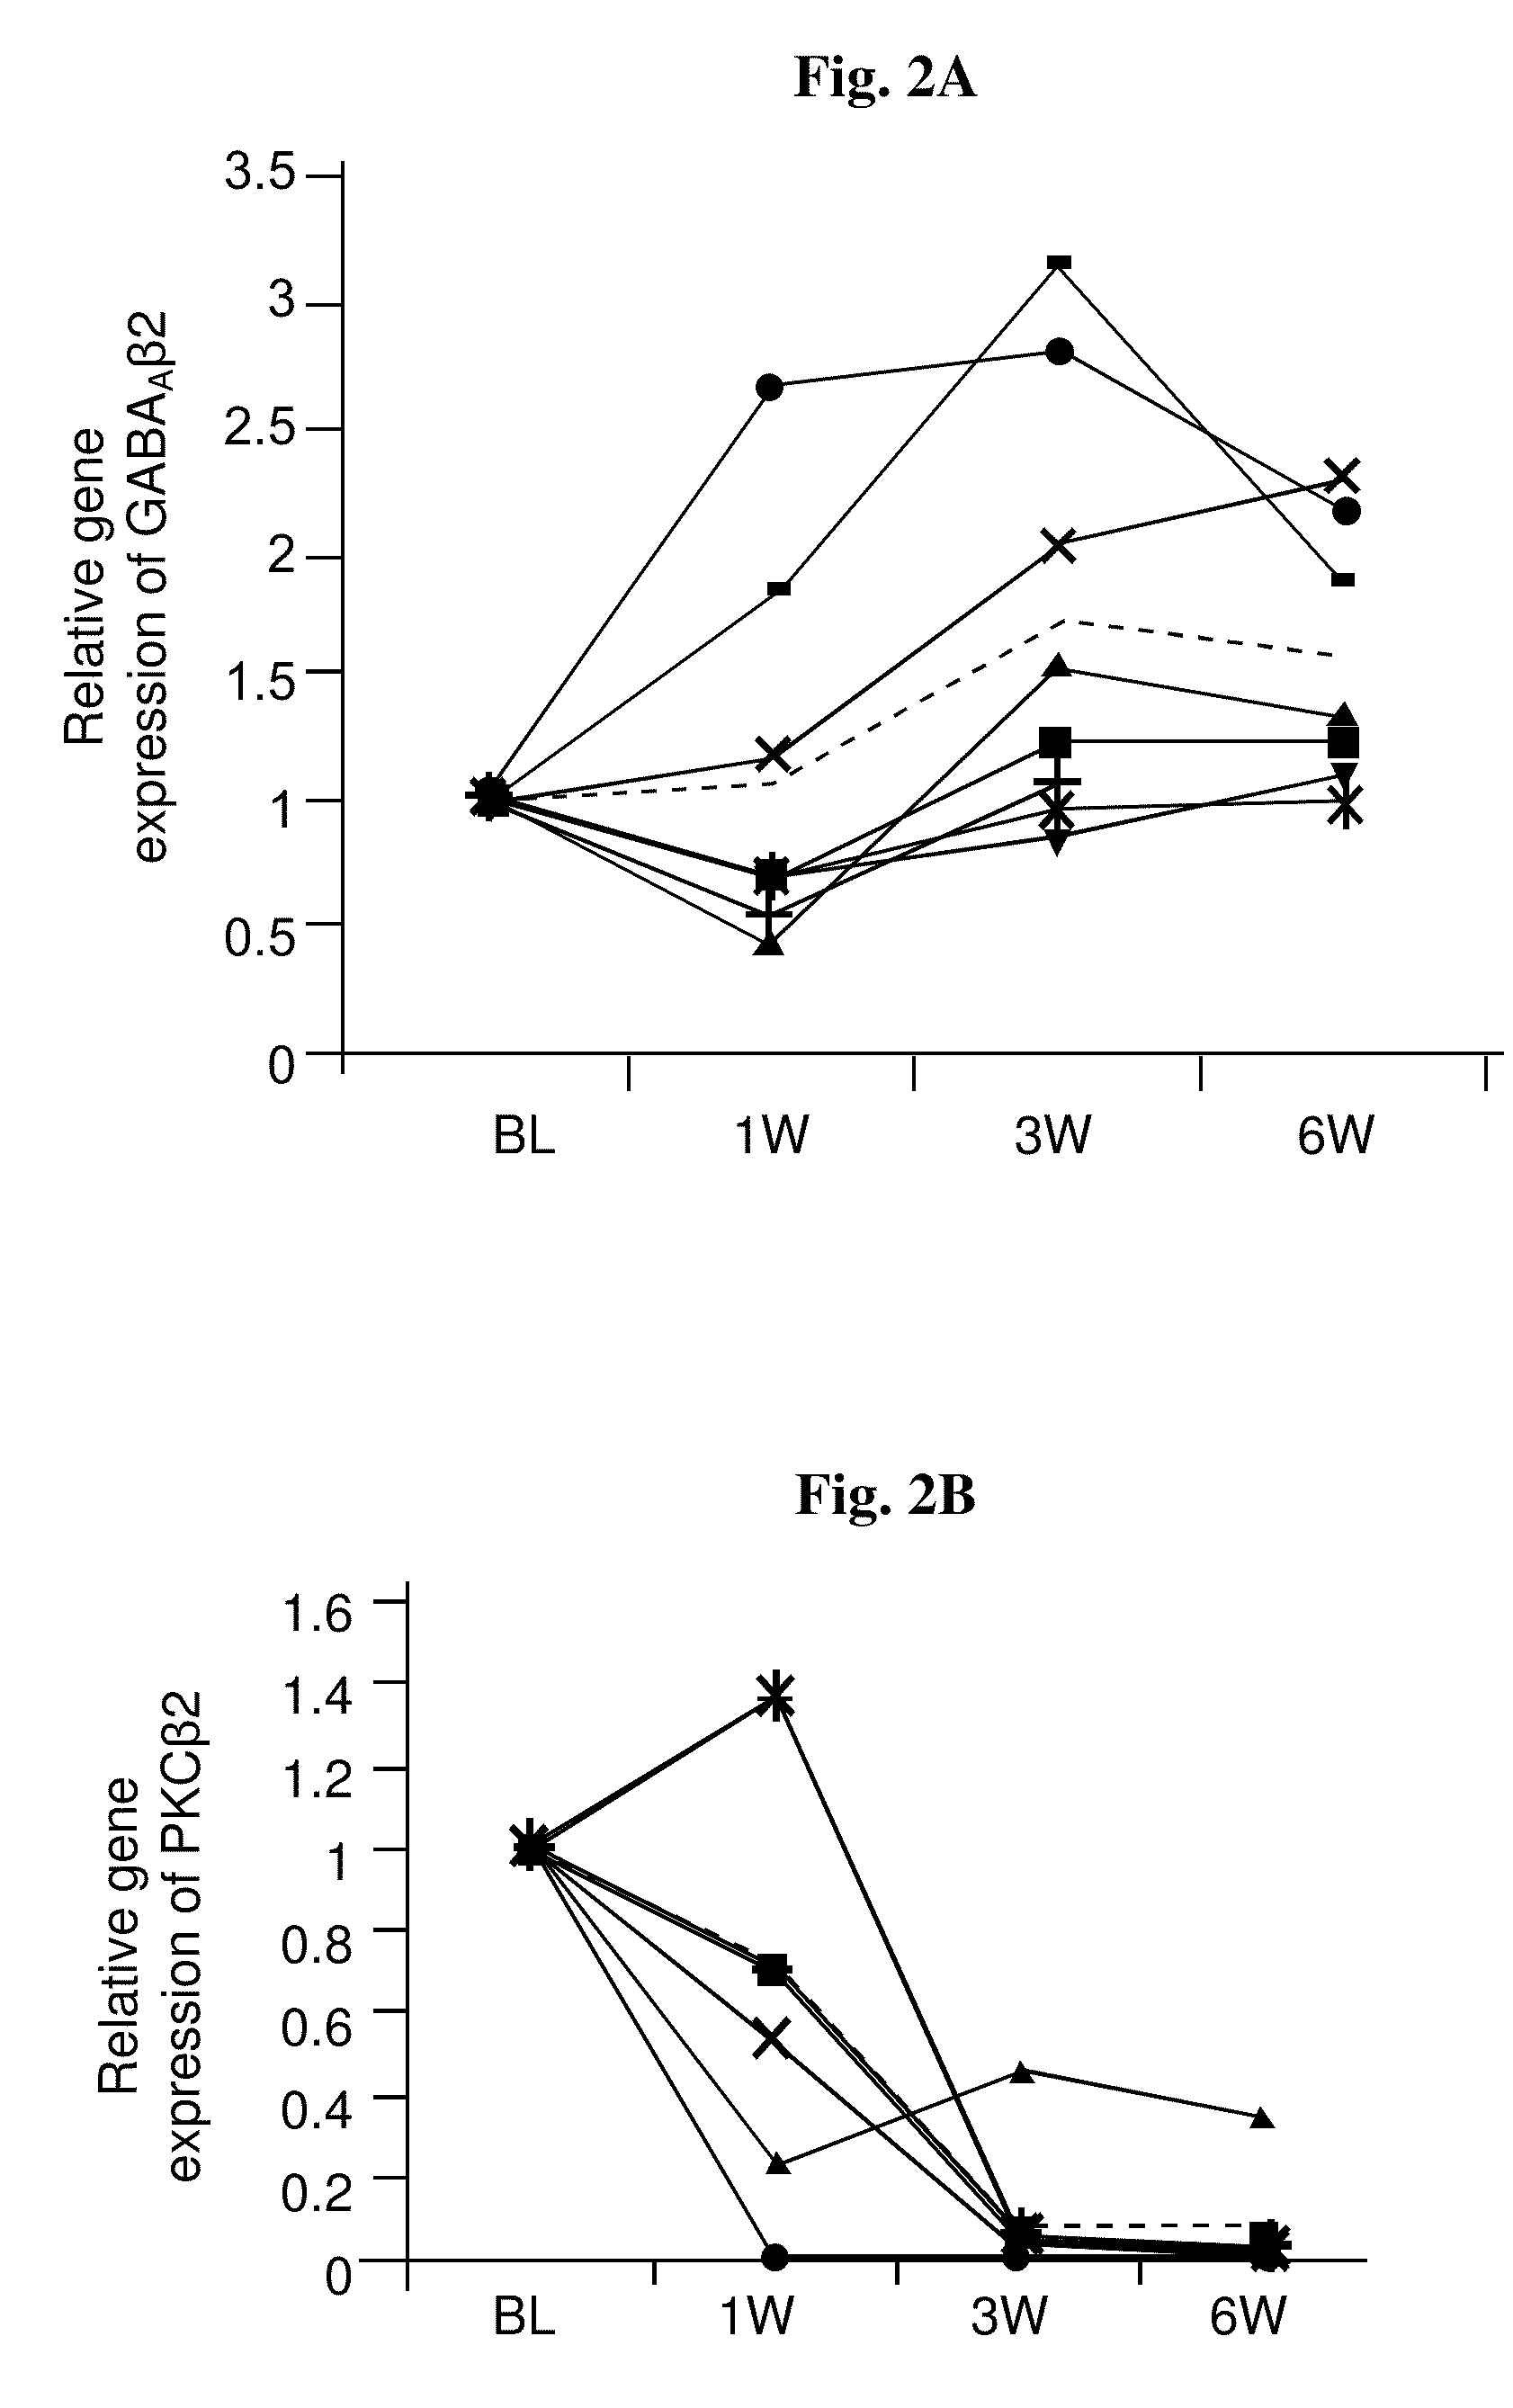 Methods for evaluation prognosis and follow-up of drug treatment of psychiatric diseases or disorders